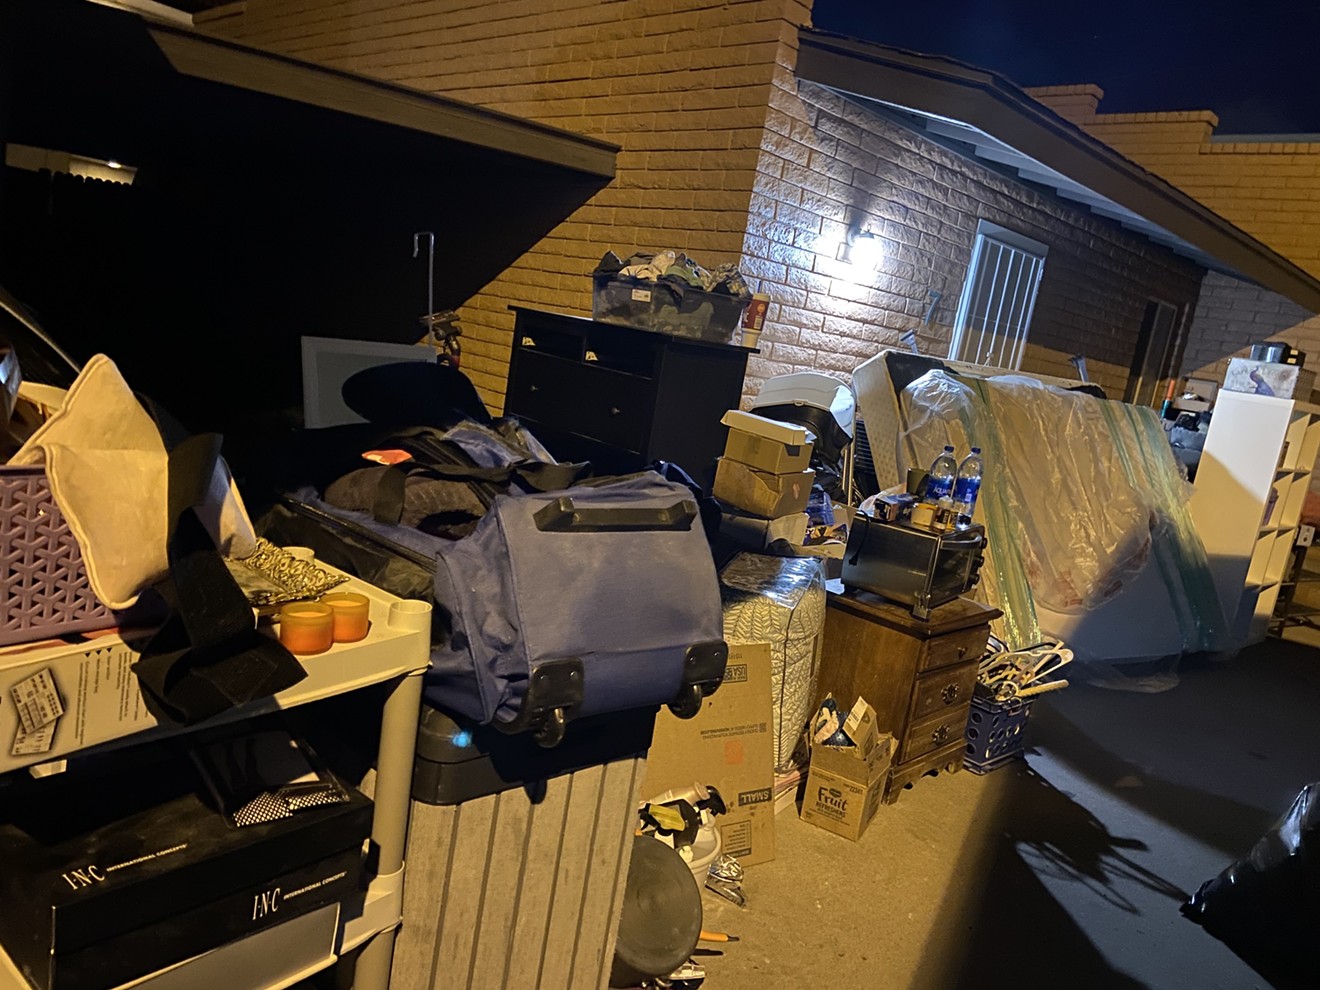 Phoenix resident Jennifer Gosnell took a photo of her belongings outside after she was evicted in December 2021.